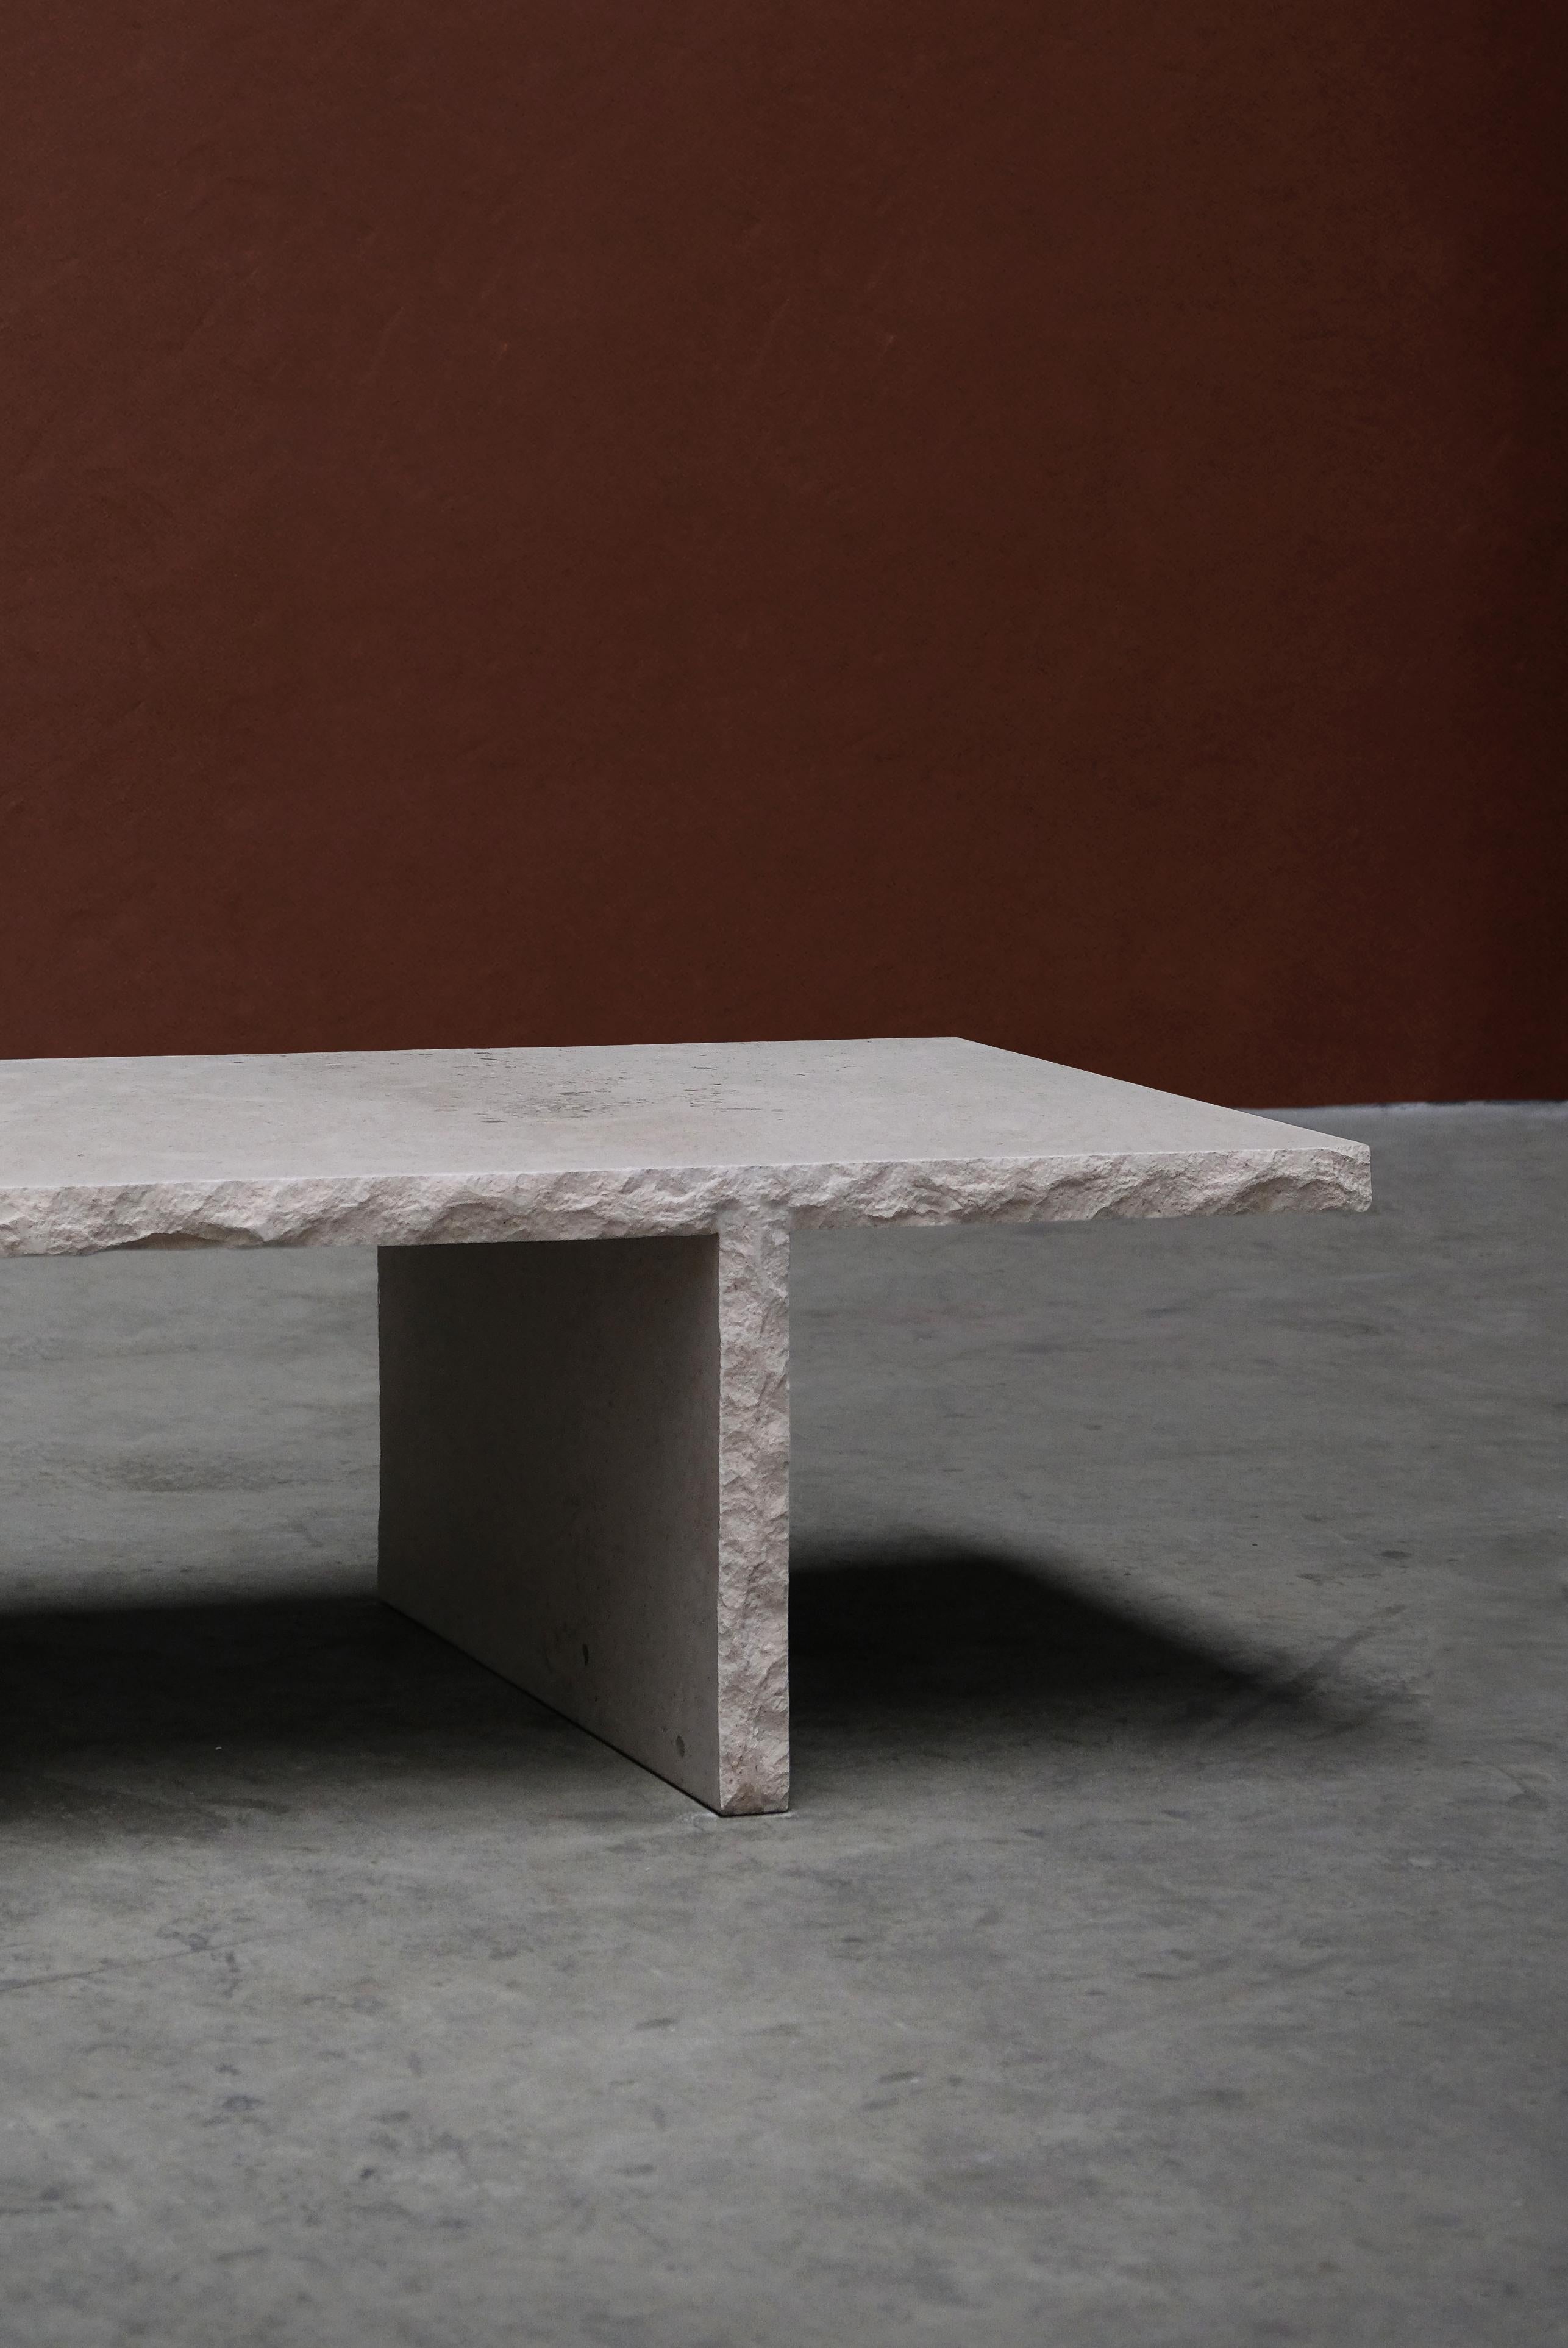 Sculpted Bourgogne Stone Coffee Table, Fruste by Frederic Saulou For Sale 5